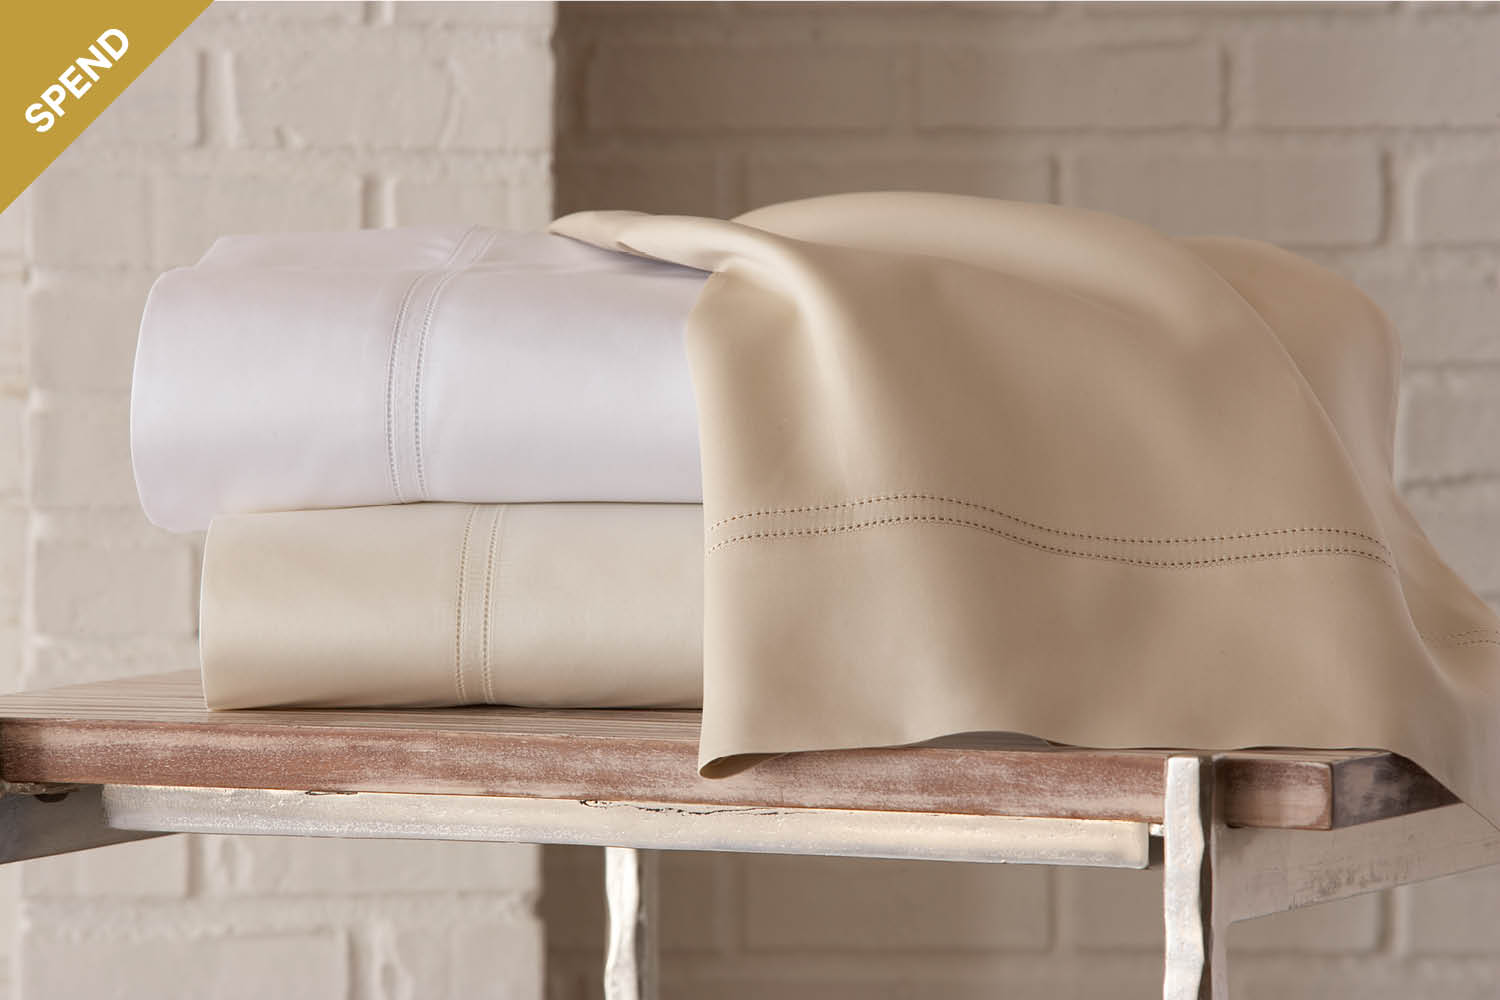 Peacock Alley Sheets Will Change the Way You Sleep for Under $500 